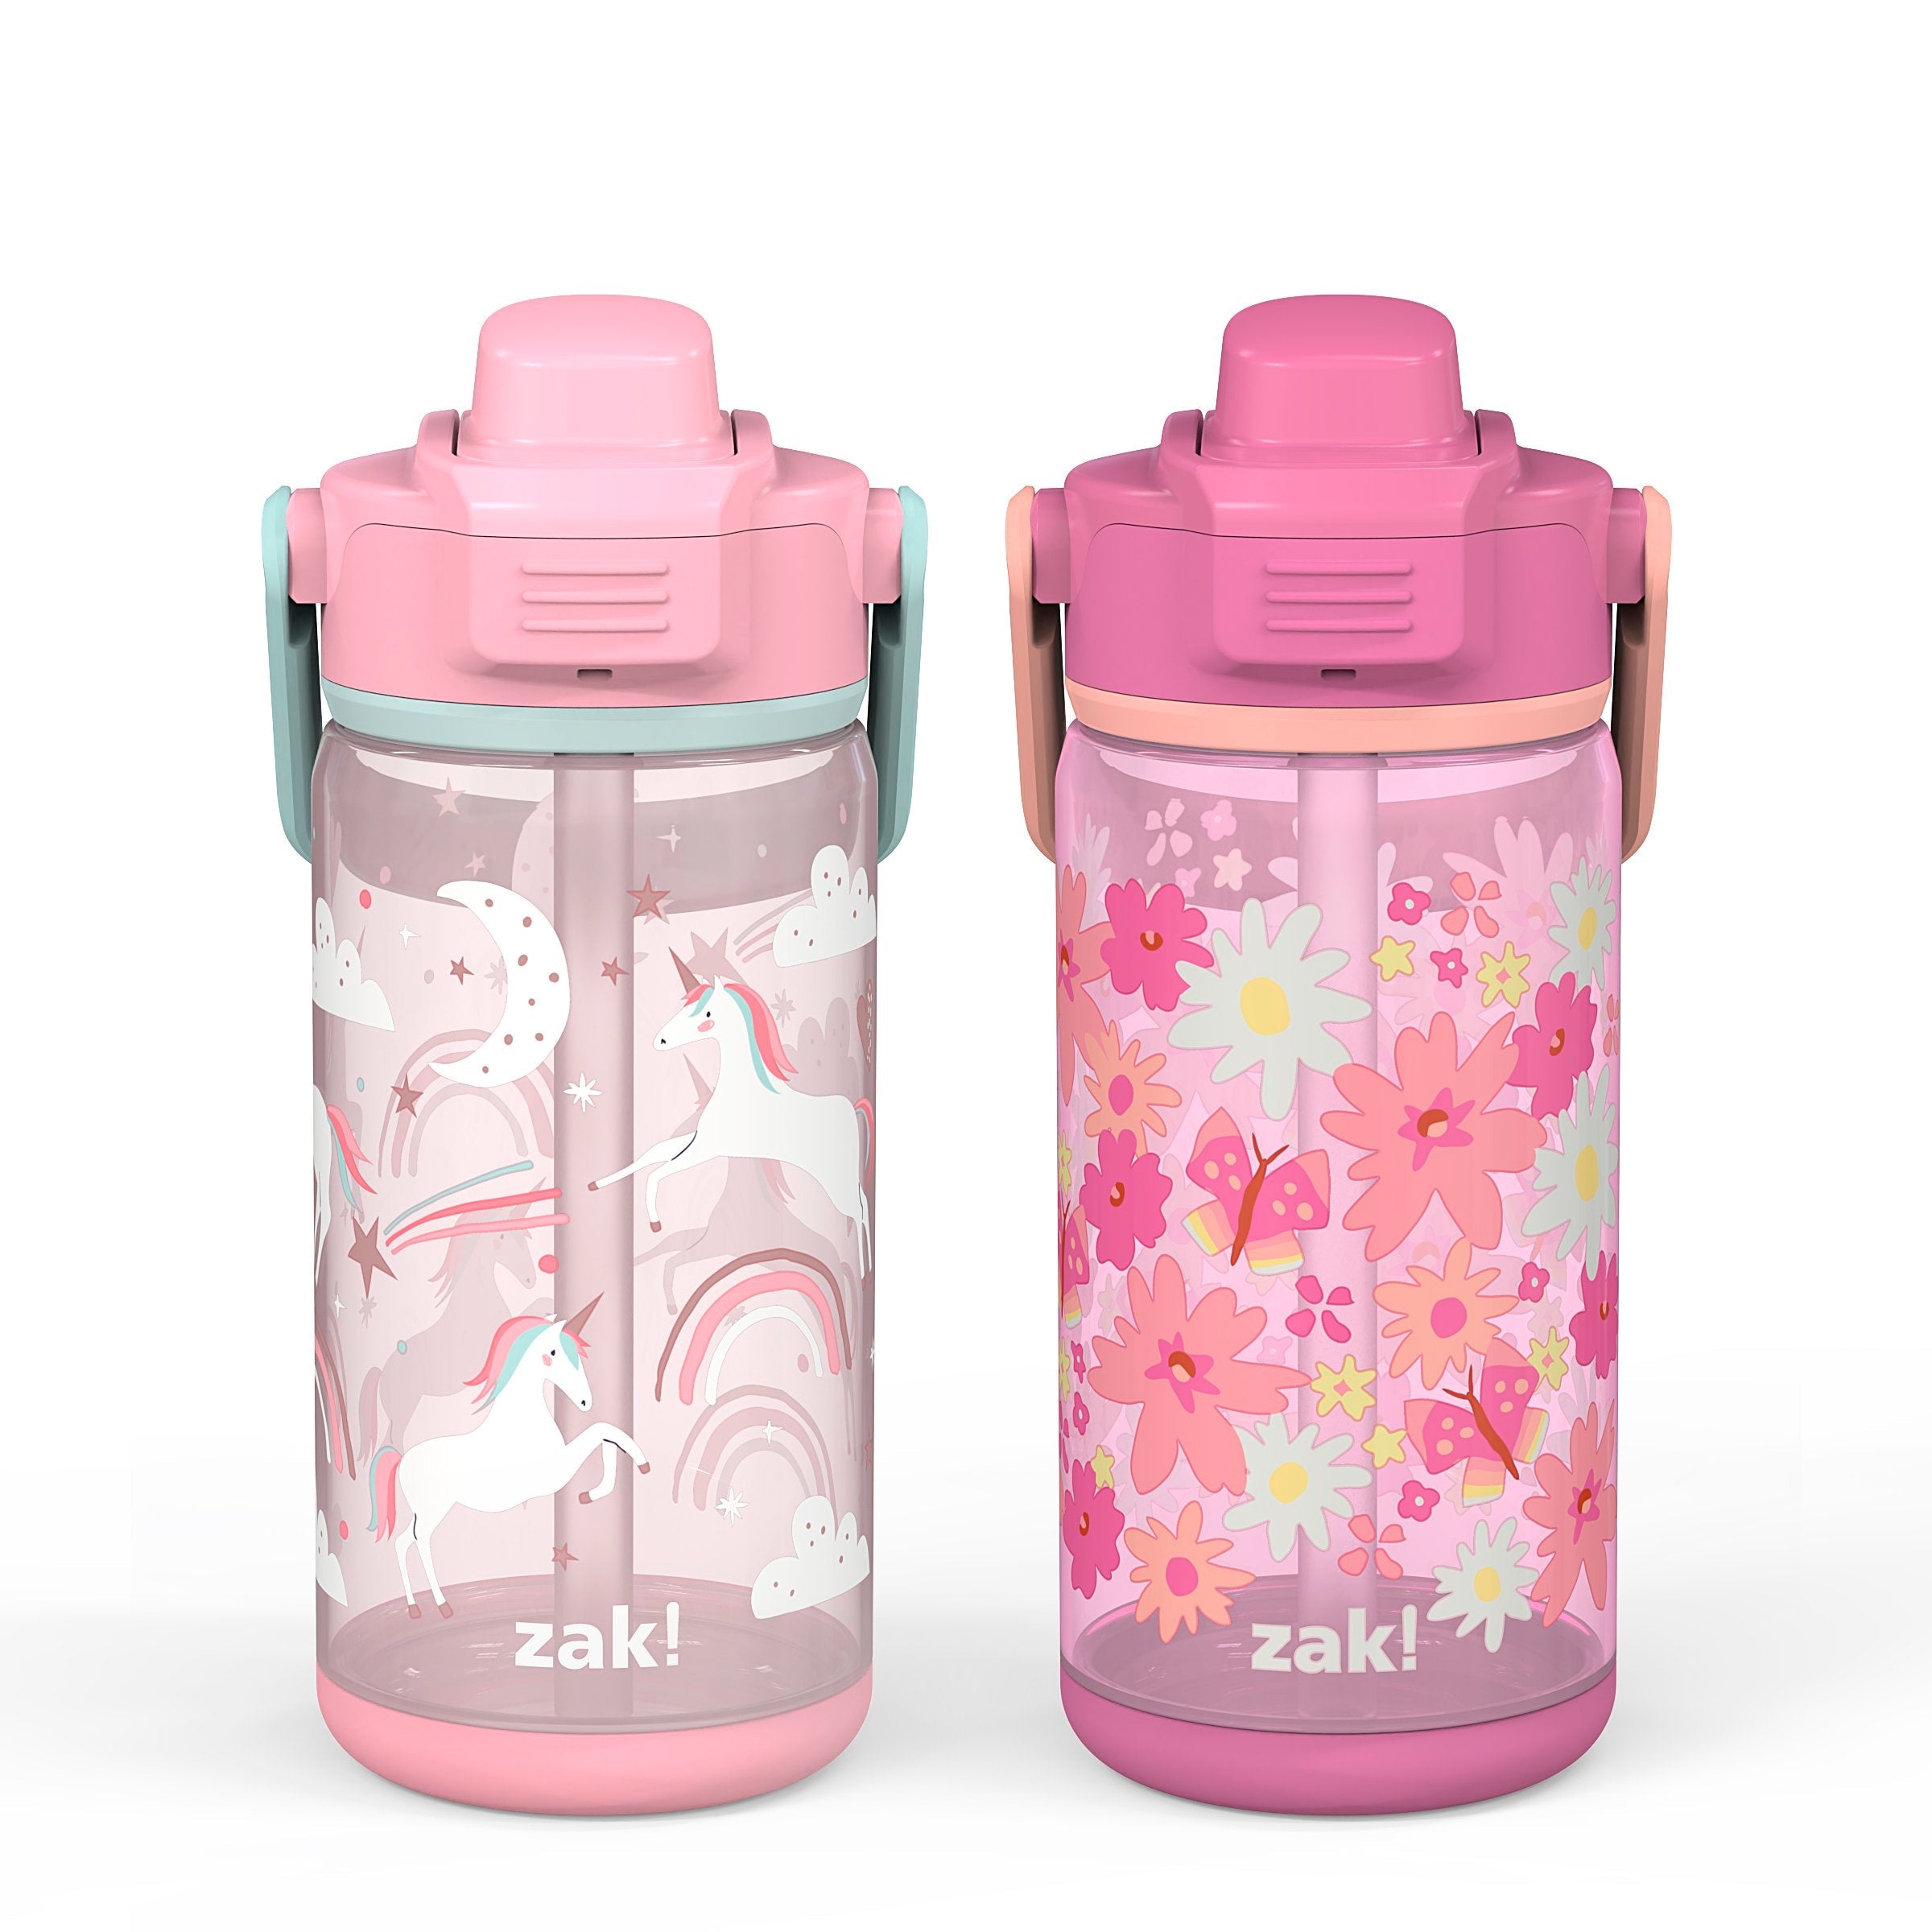  Disney Princess Water Bottle Bundle - 2pc Disney Princess Cup  Set with 2 16.5 Ounce Sullivan Water Bottles, Stickers and More